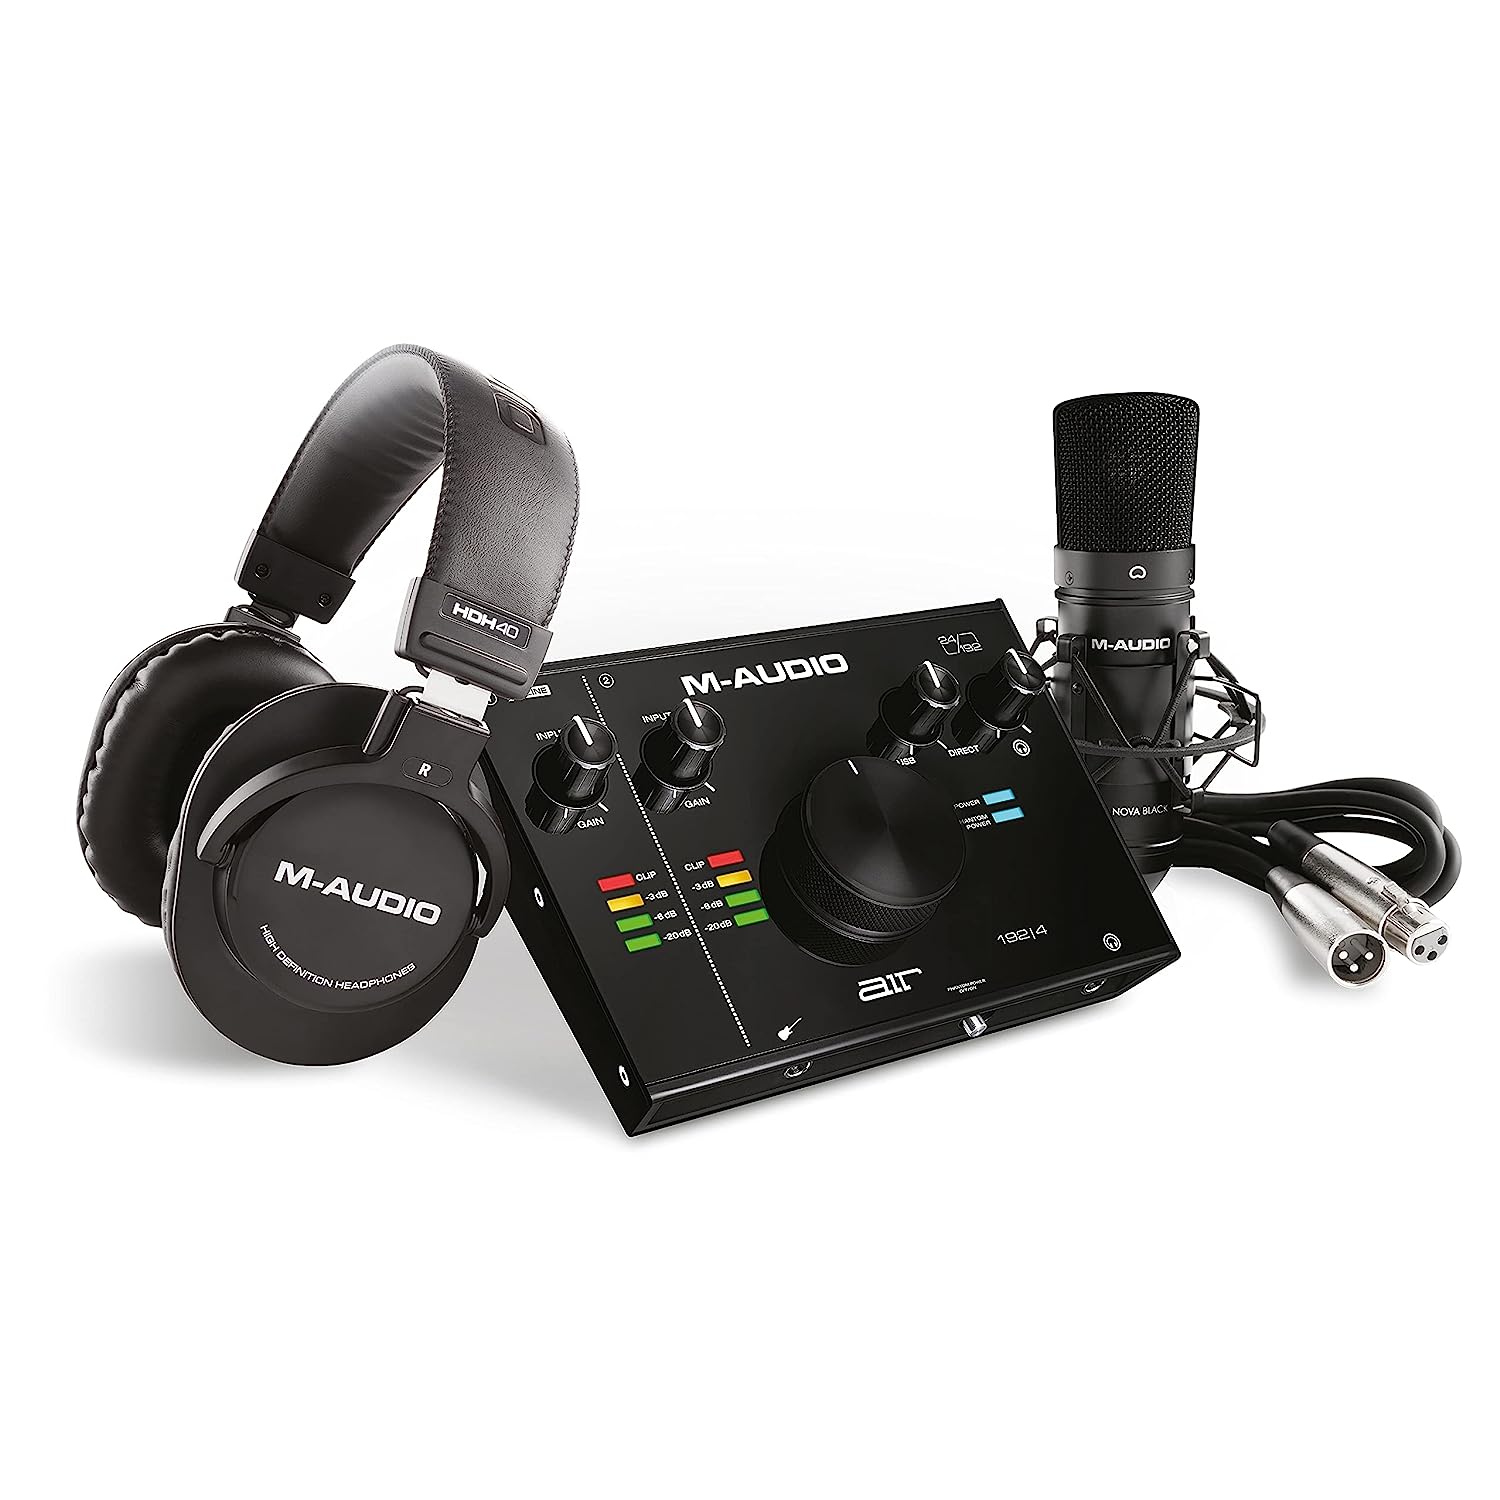 4 Vocal Studio Pro -Complete Recording  kit -2-In/2-Out USB Audio Interface with Condenser Microphone, Shockmount, XLR Cable, Headphone